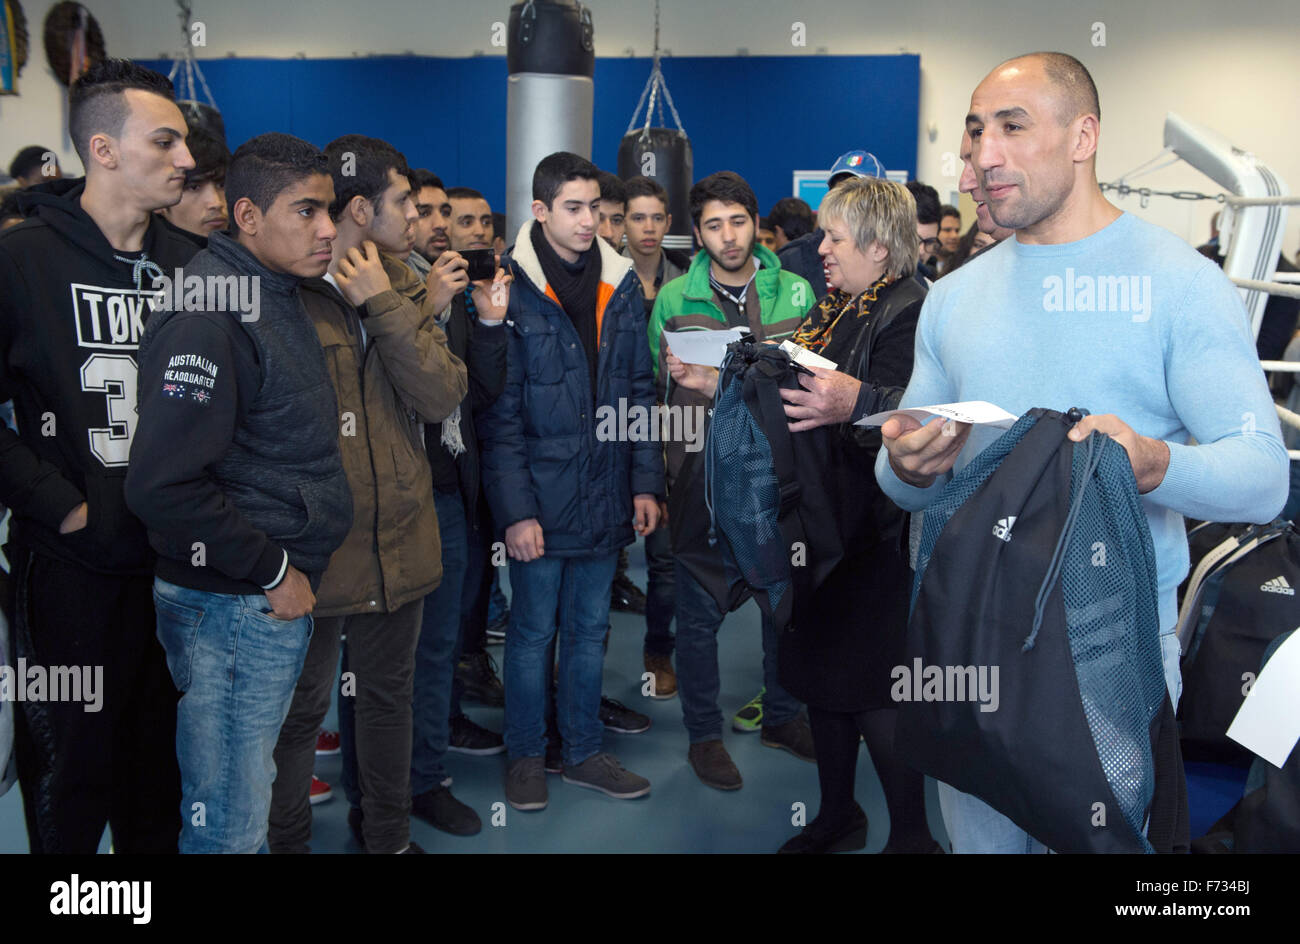 Boxing world champion Arthur Abraham (R) and Kordula Kovac, member of the German federal parliament, arrive to a training session with underaged refugees at the Max Schmeling Gymnasium in Berlin, Germany, 24 November 2015. The event featuring unaccompanied refugees was organised by Team Sauerland, sporting goods manufacturer Adidas, the German Confederation of Skilled Crafts and German political party CDU. Photo: SOEREN STACHE/dpa Stock Photo